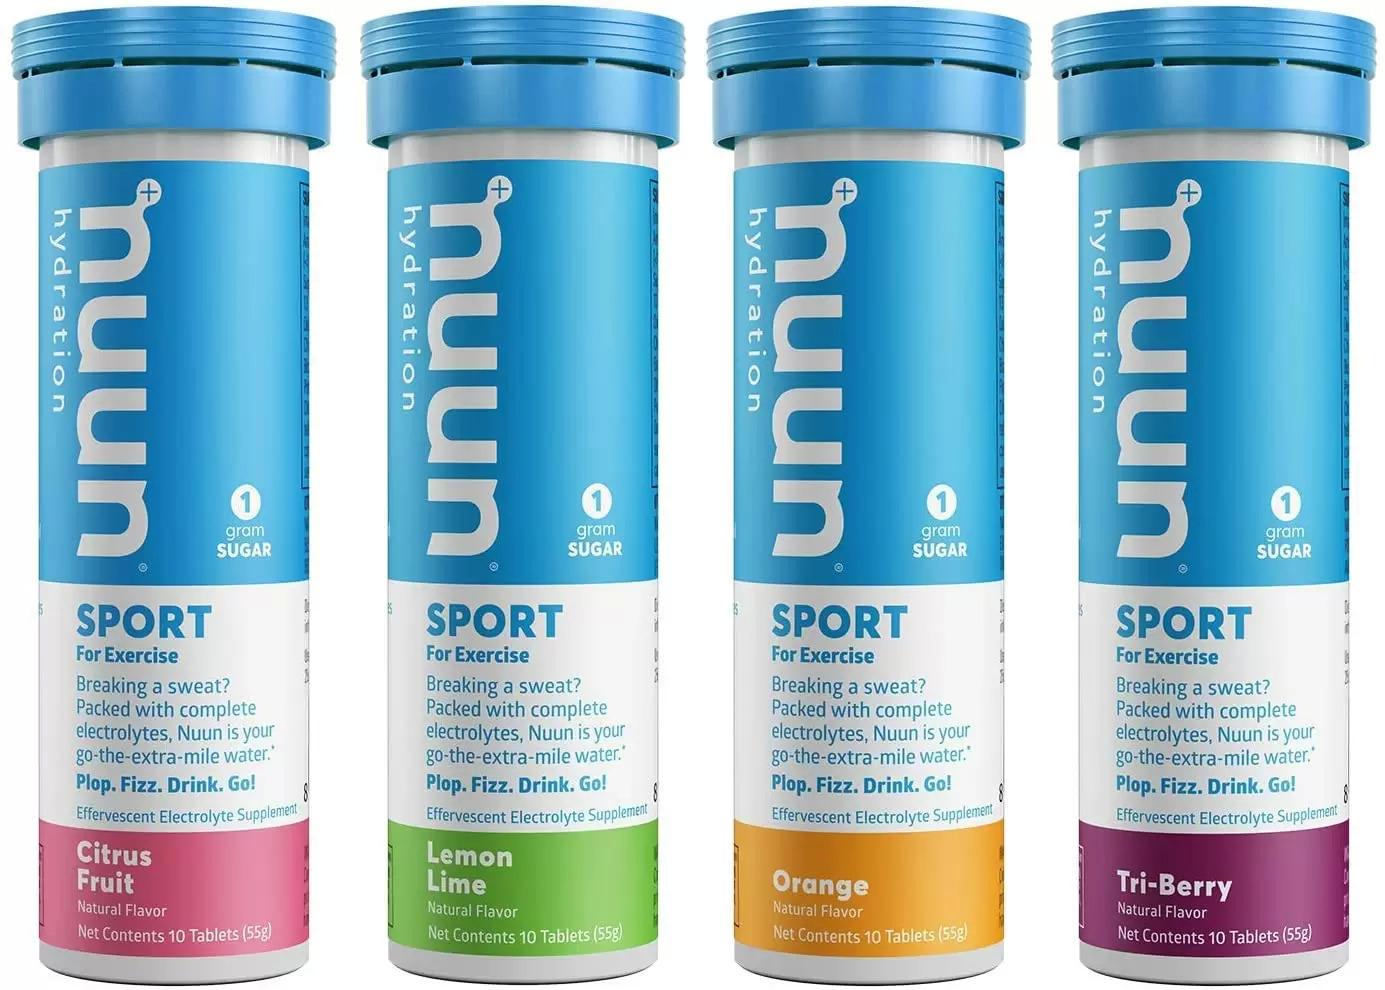 Nuun Sport Electrolyte Drink Tablets, Citrus Berry Mixed Box for $15.93 Shipped